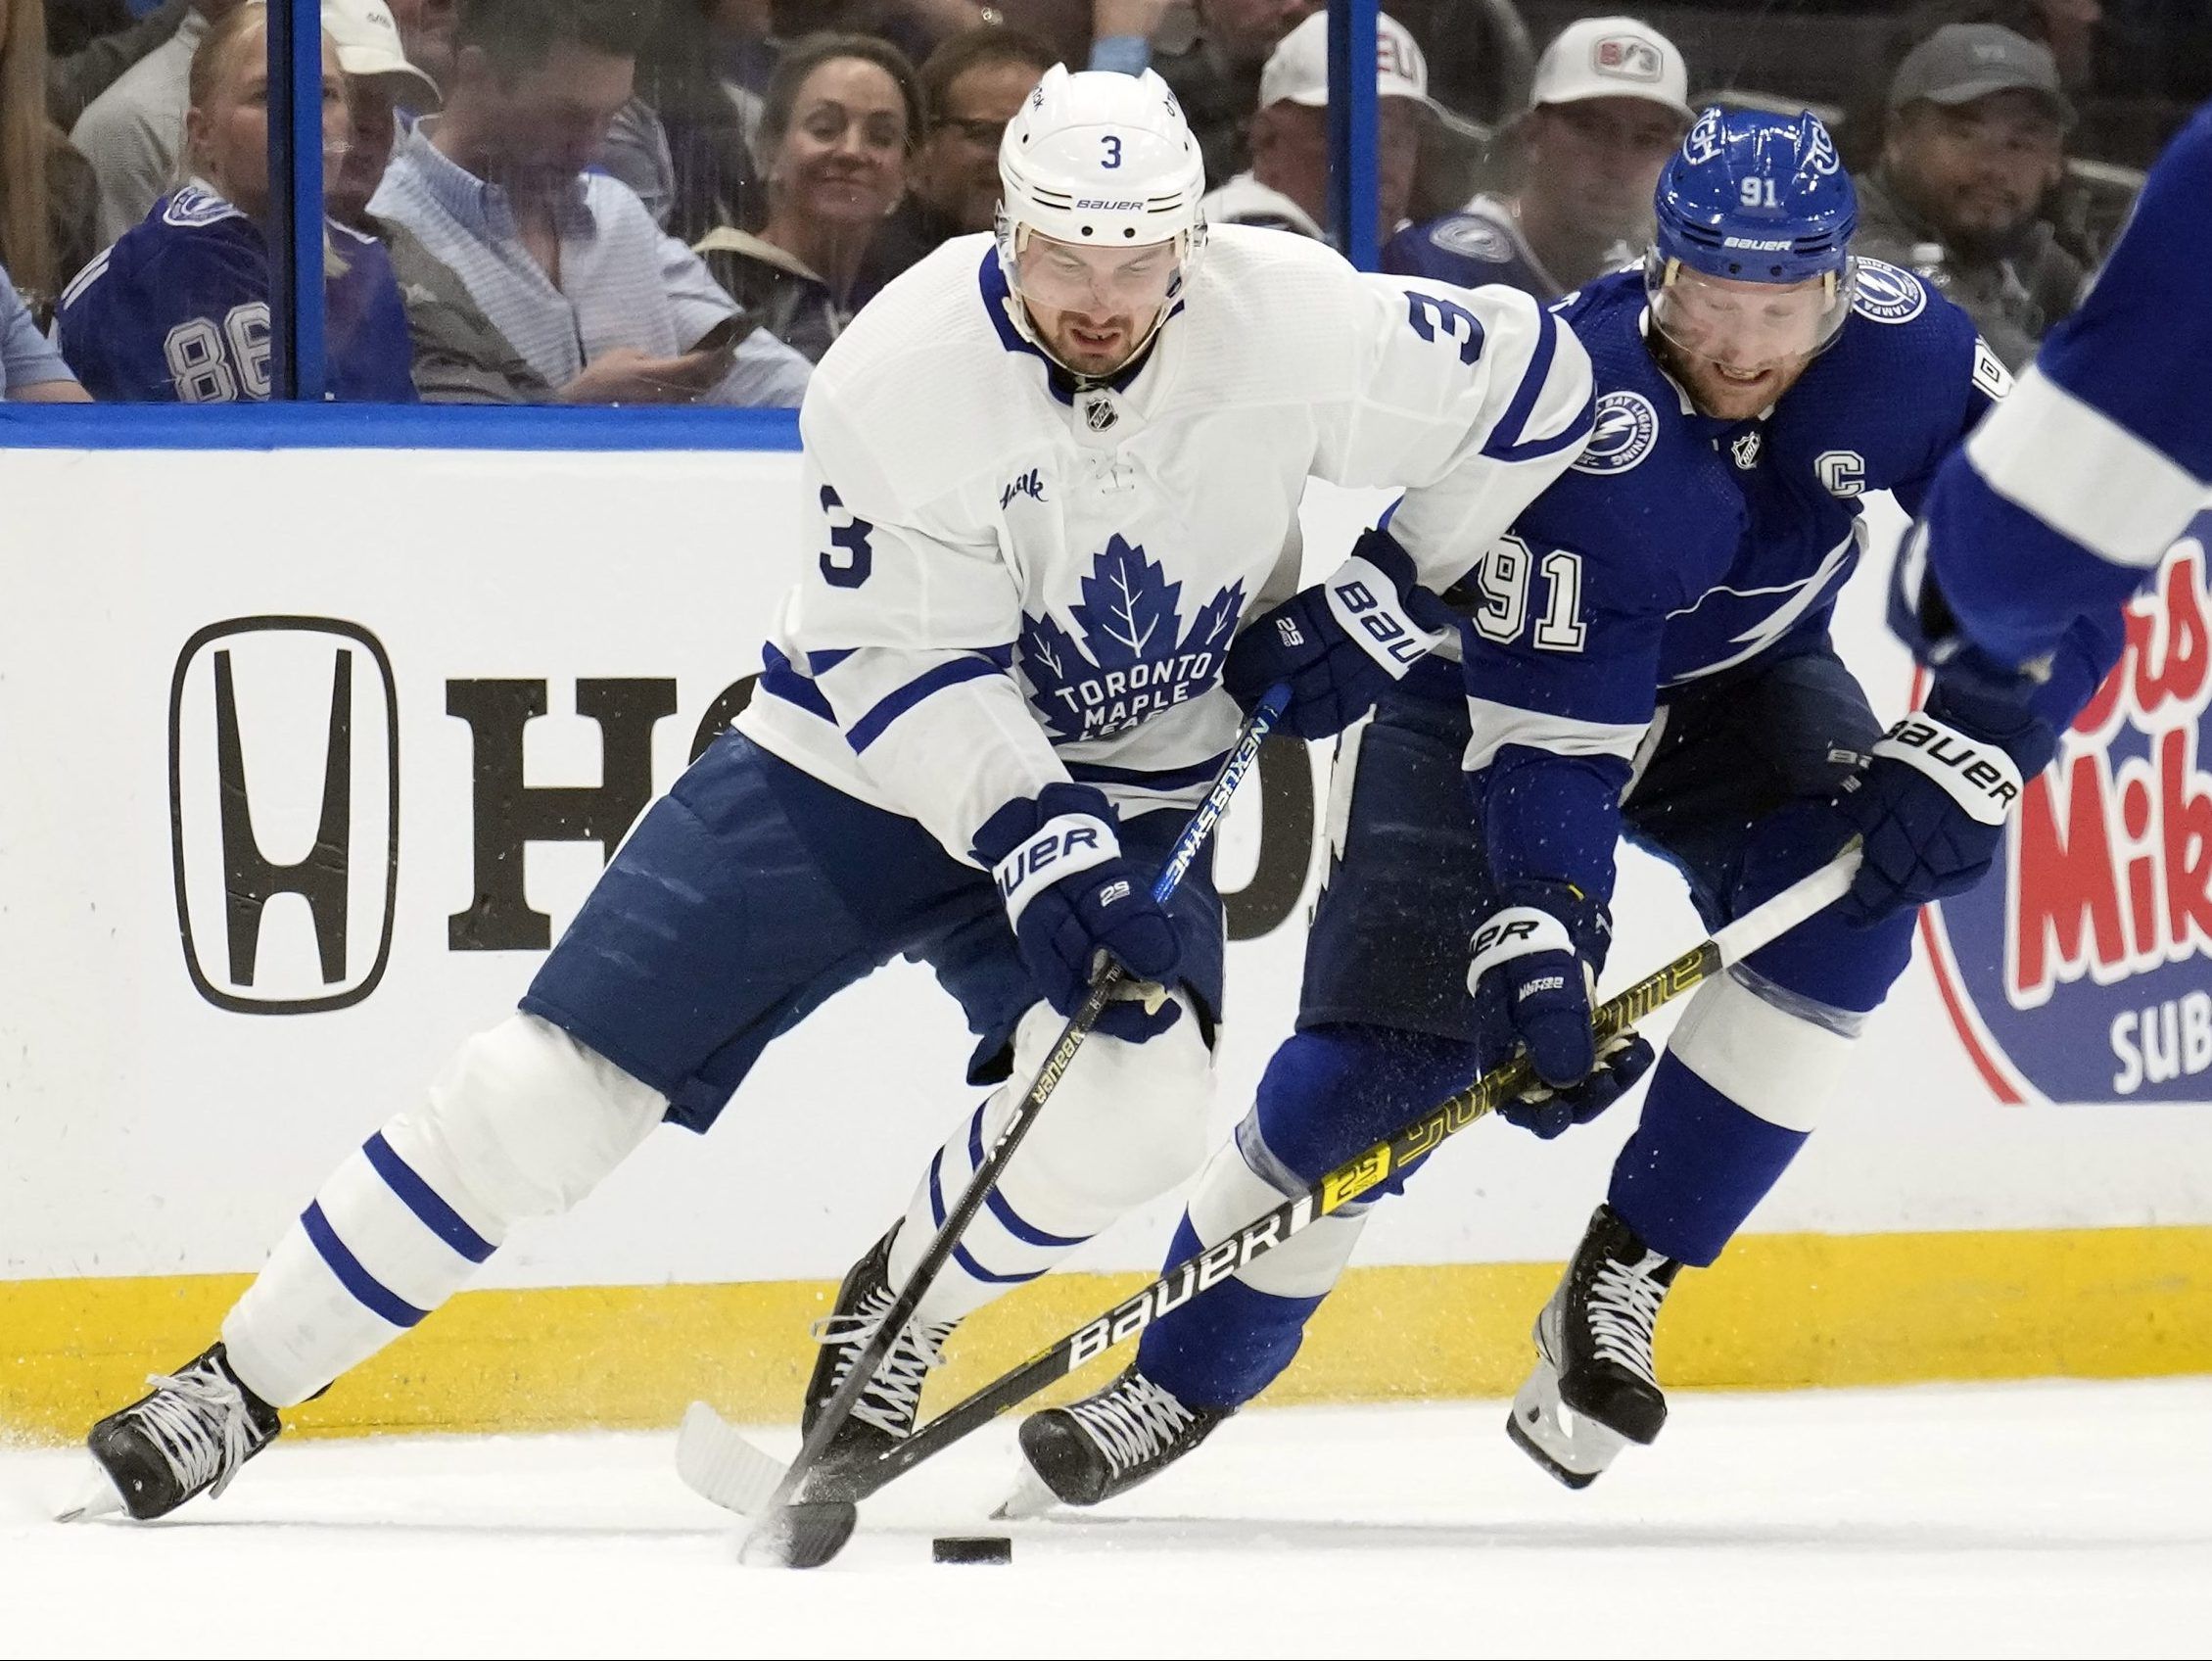 Auston Matthews suspended: Maple Leafs star benched by NHL for 2 games